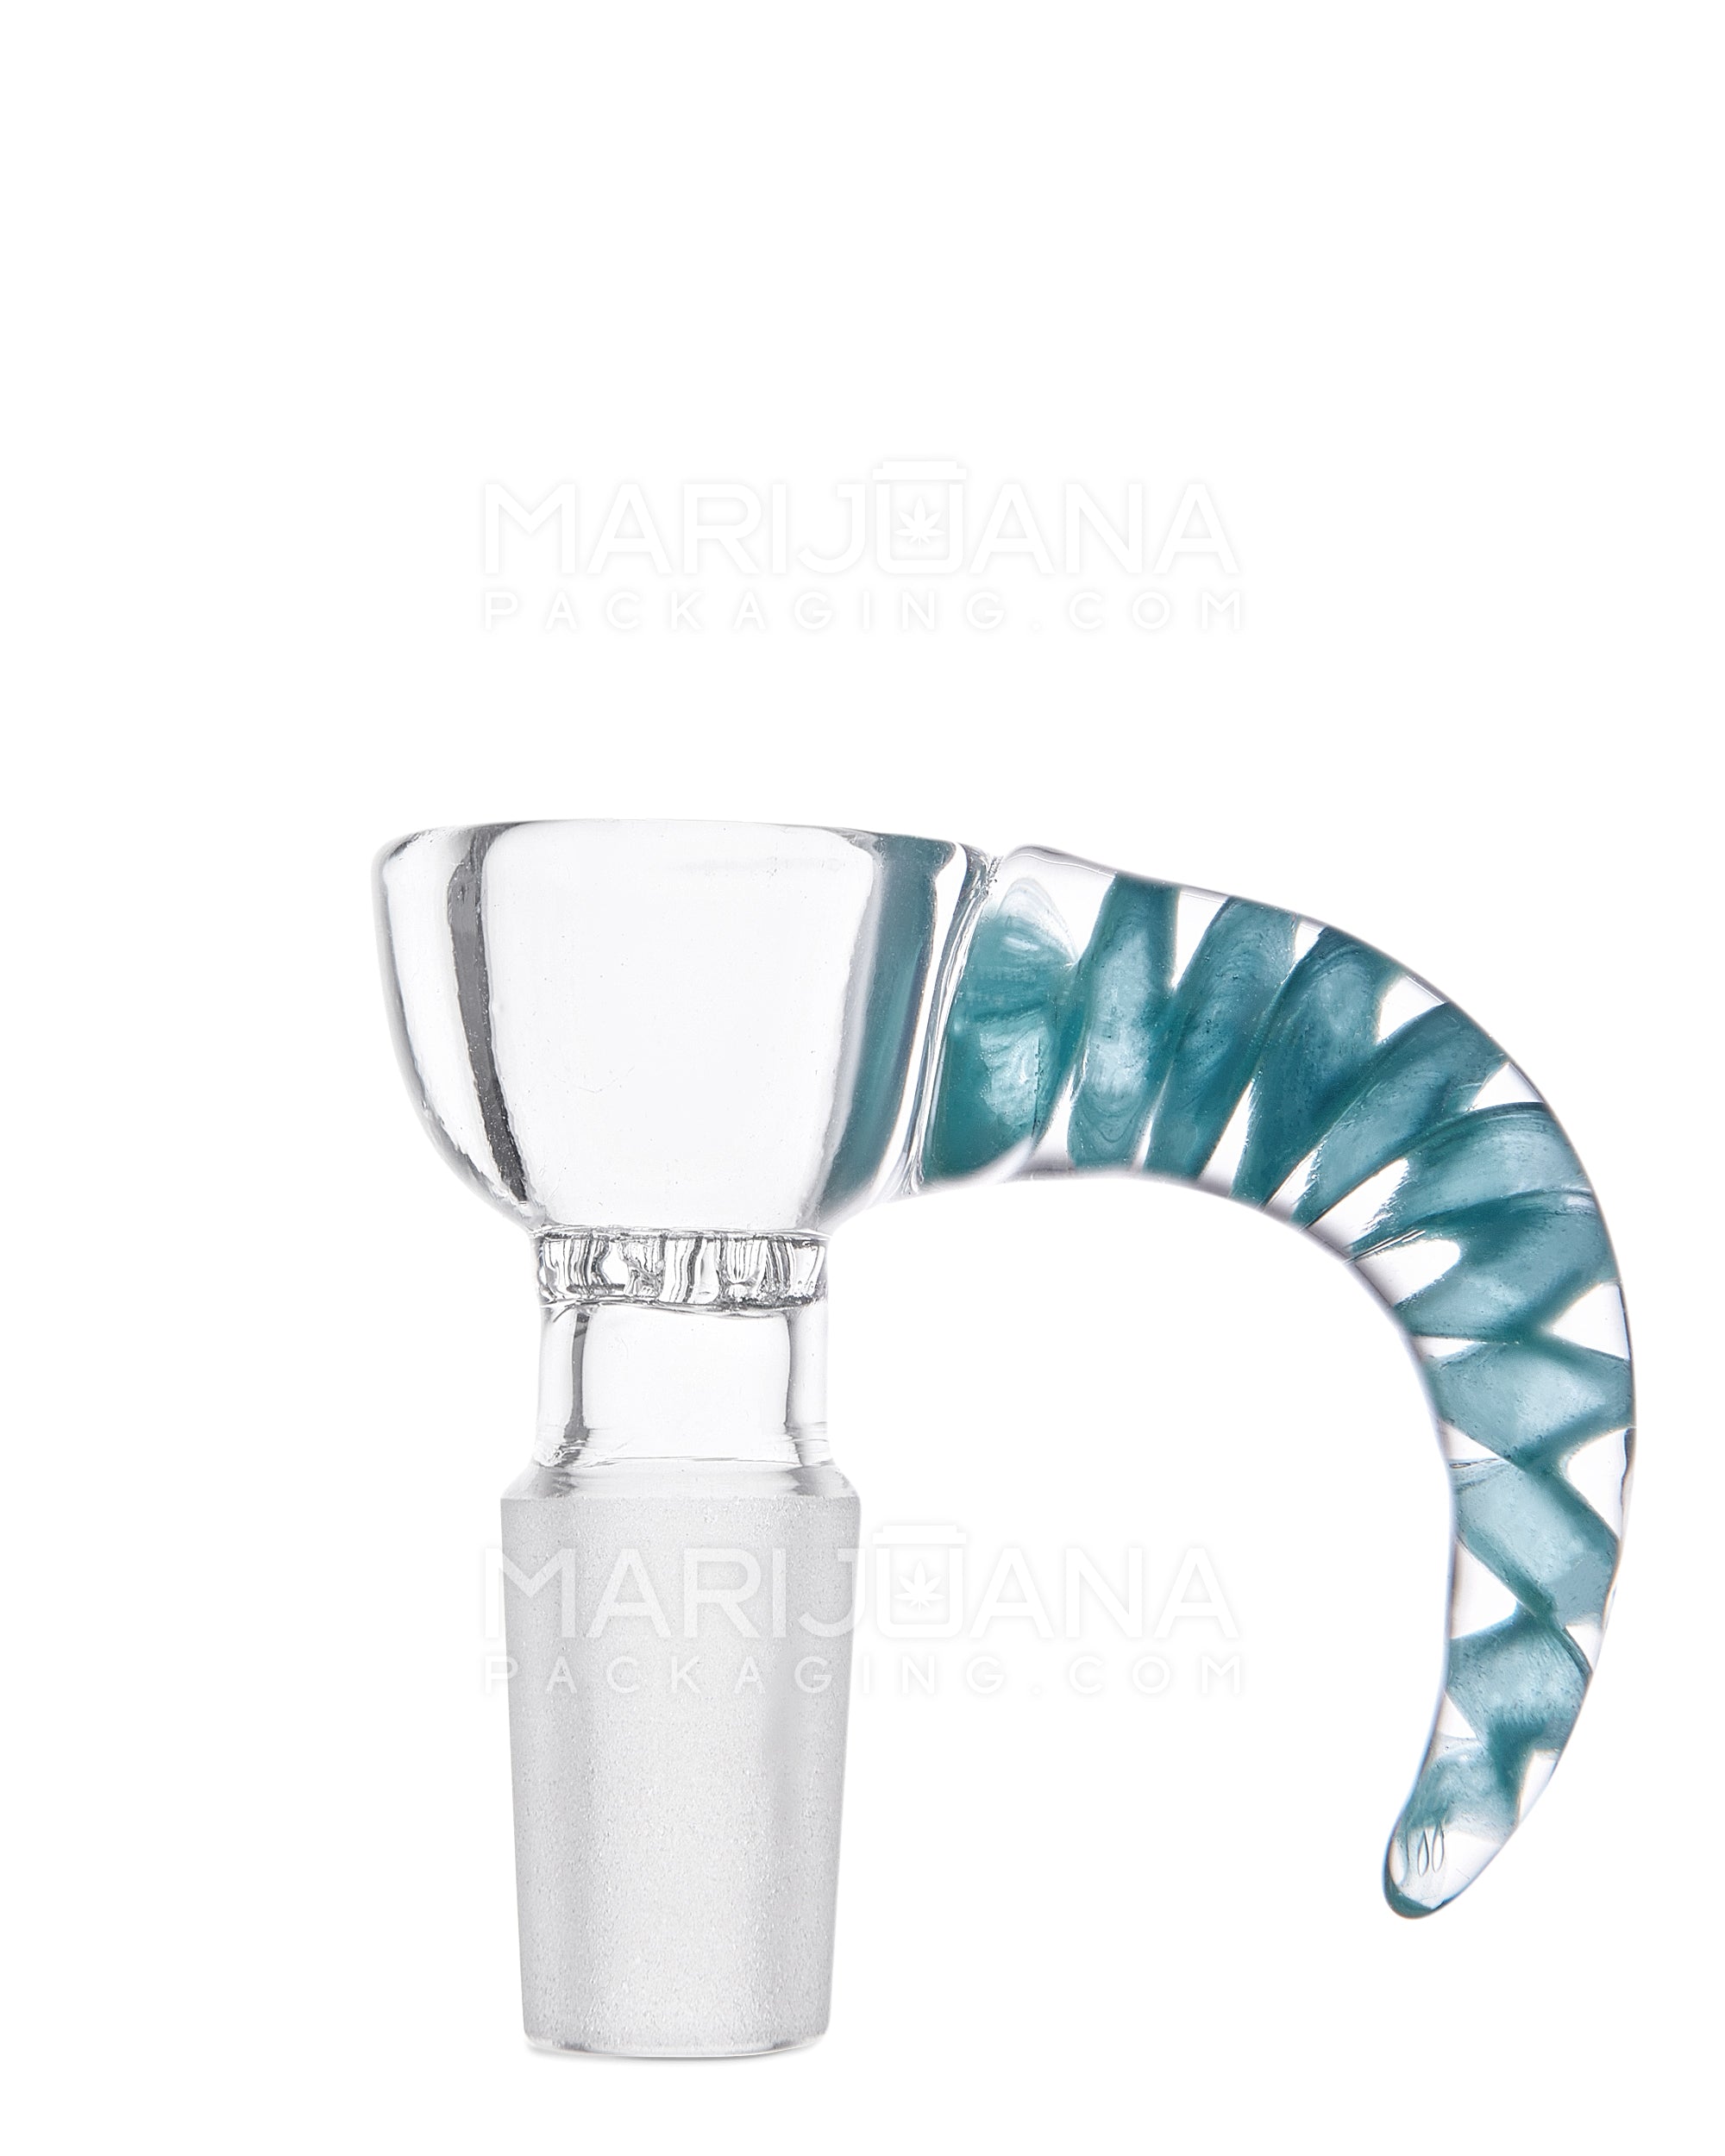 Honeycomb Bowl w/ Spiral Horn Handle | Glass - 14mm - Assorted - 1